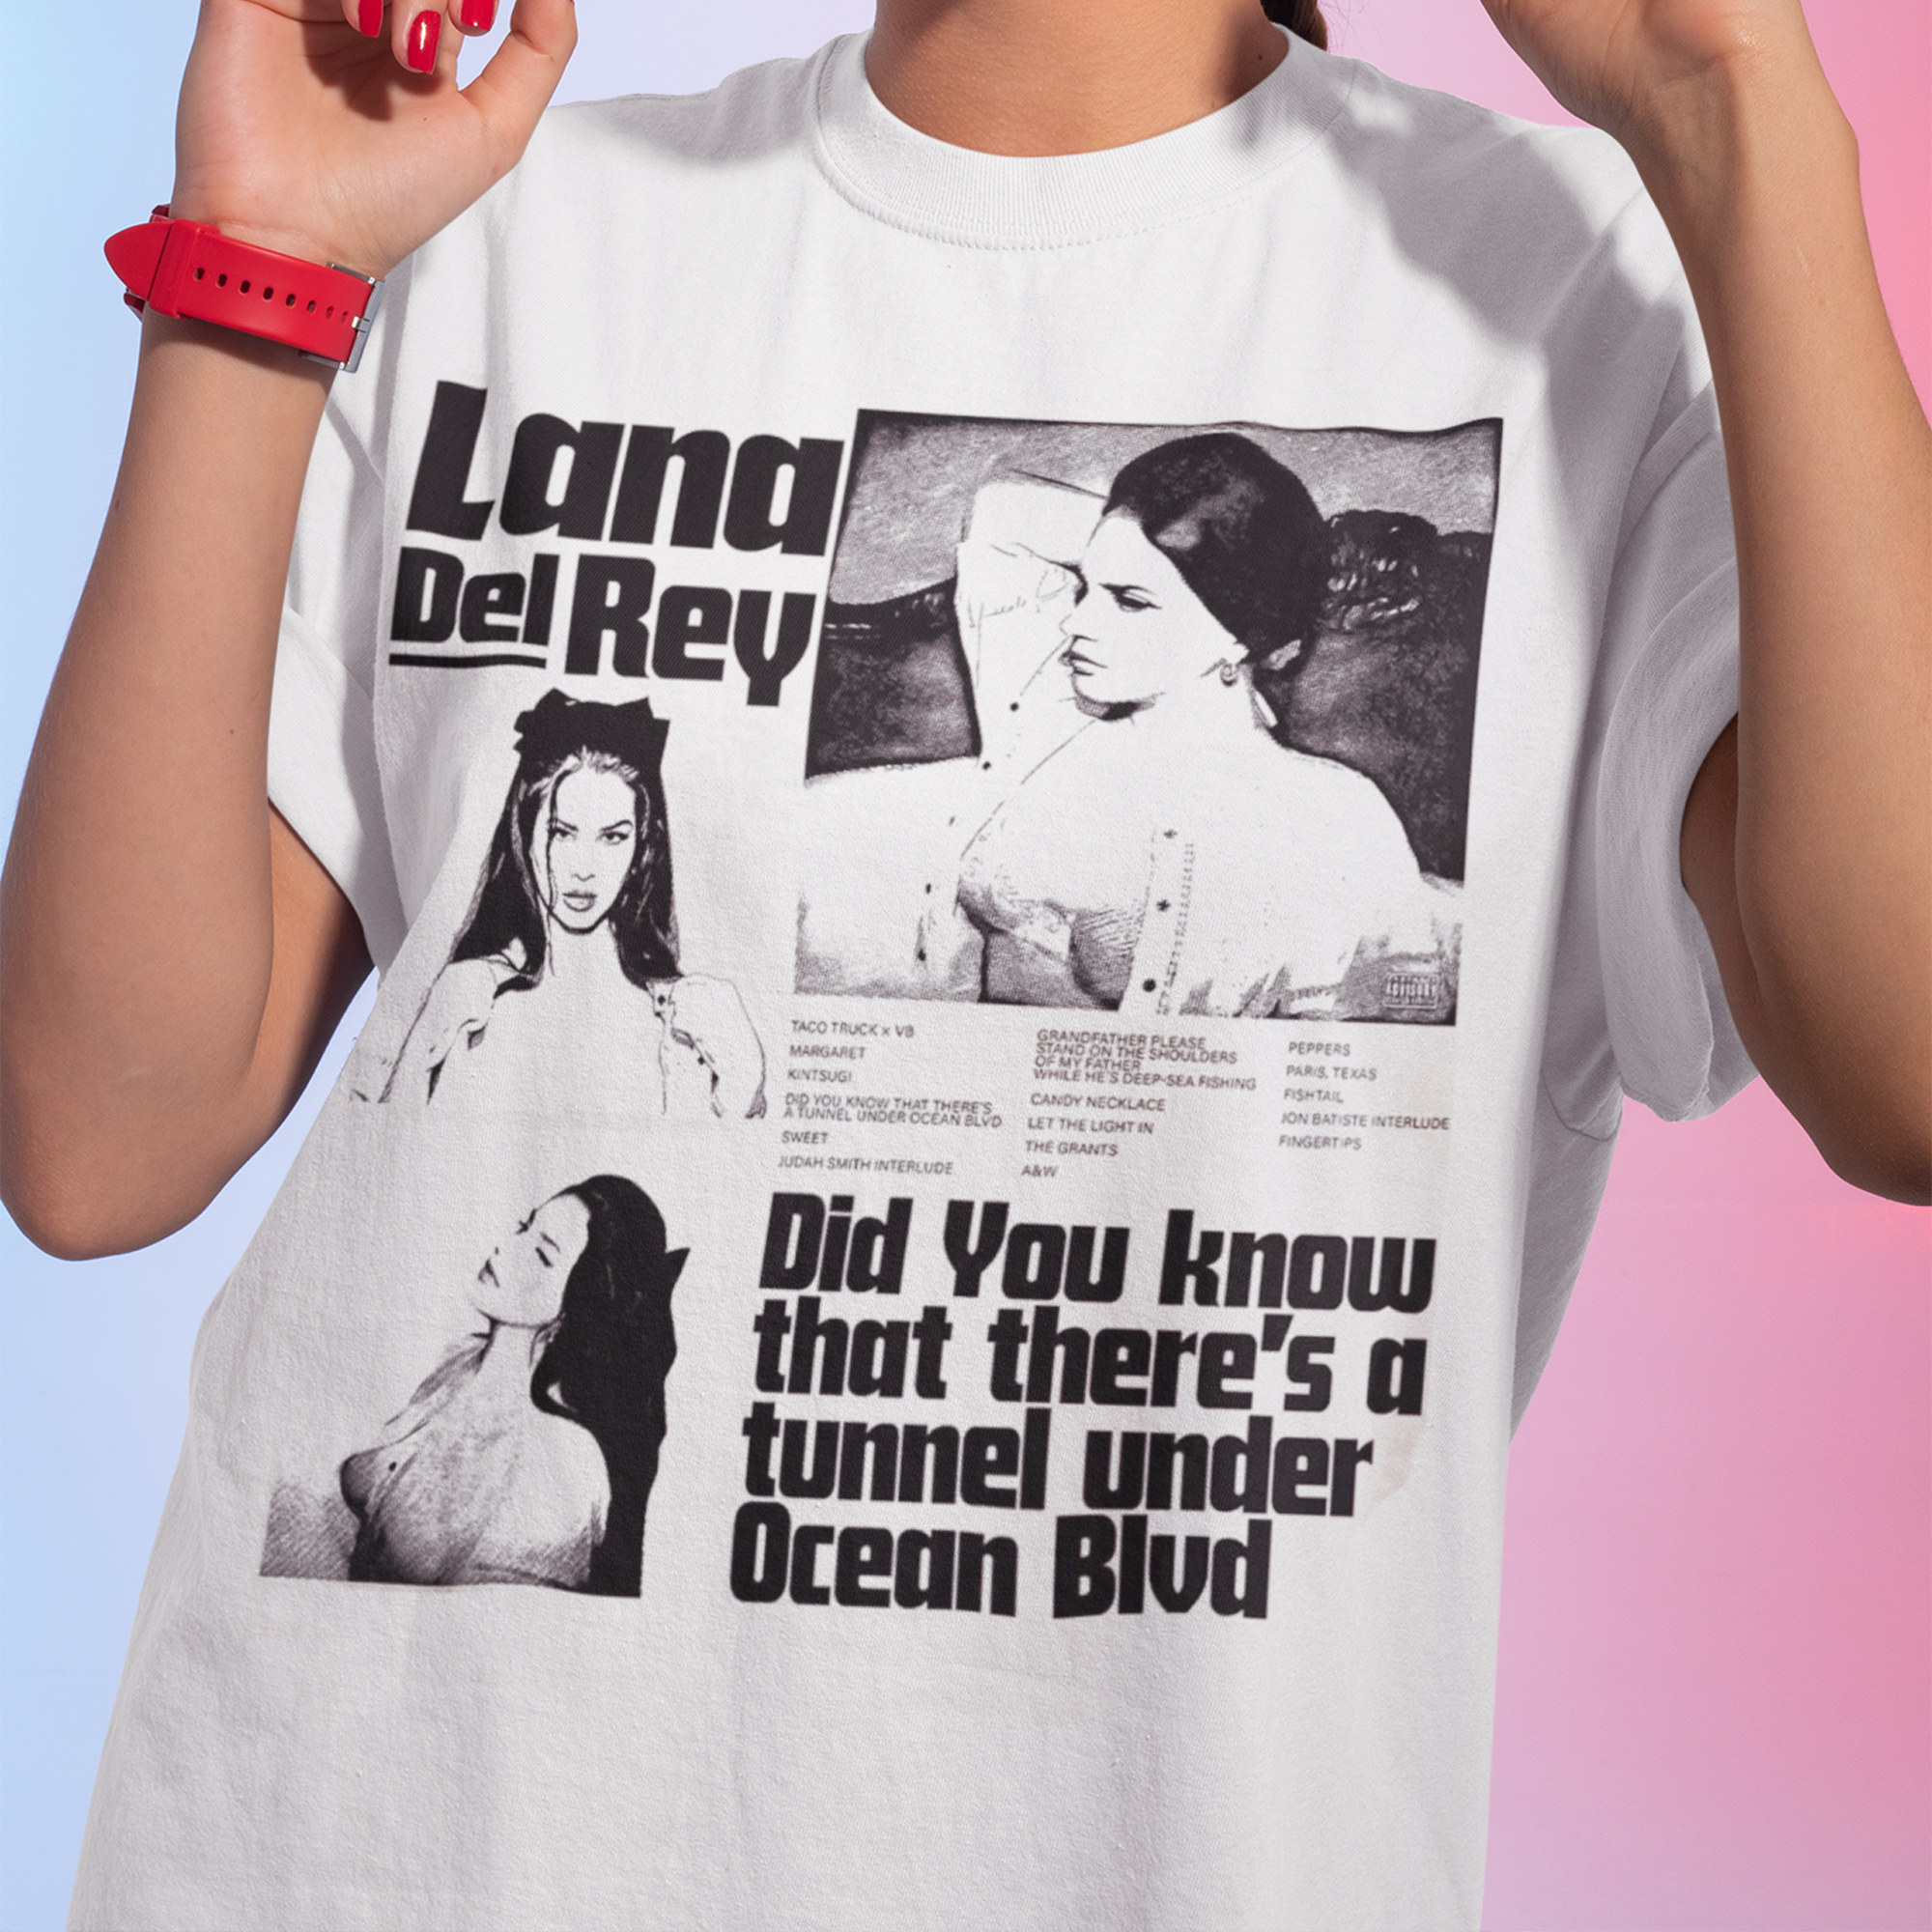 Lana Del Rey Did you know that there's a tunnel under Ocean Blvd TShirt, Lana Del rey merch 2023, Lana Del Rey shirt, Lana Del Rey 2023